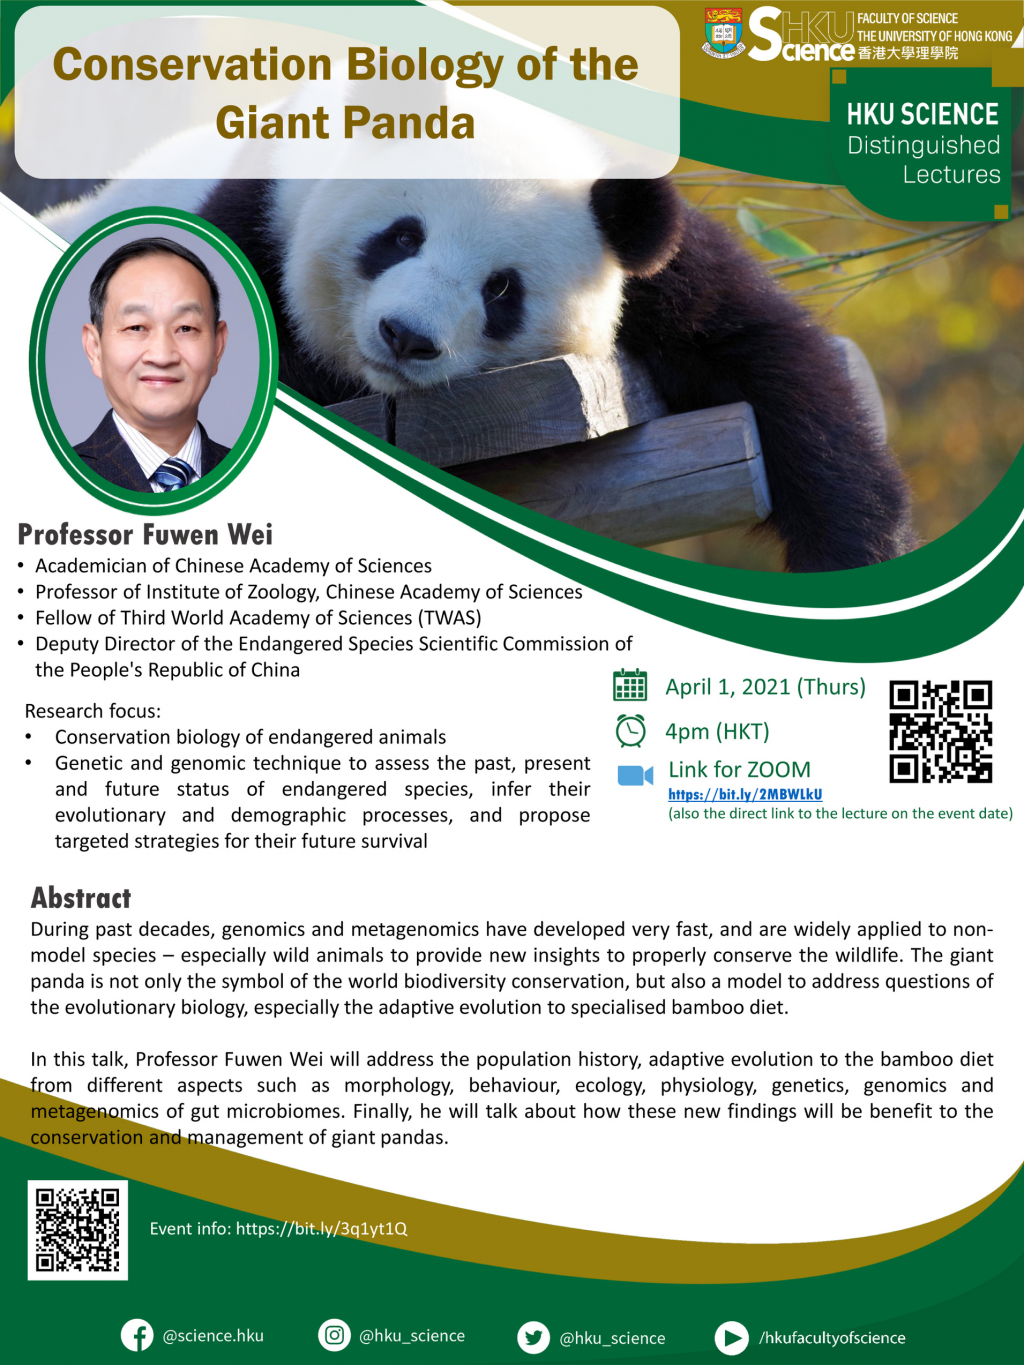 Distinguished Lecture Series - Conservation Biology of the Giant Panda